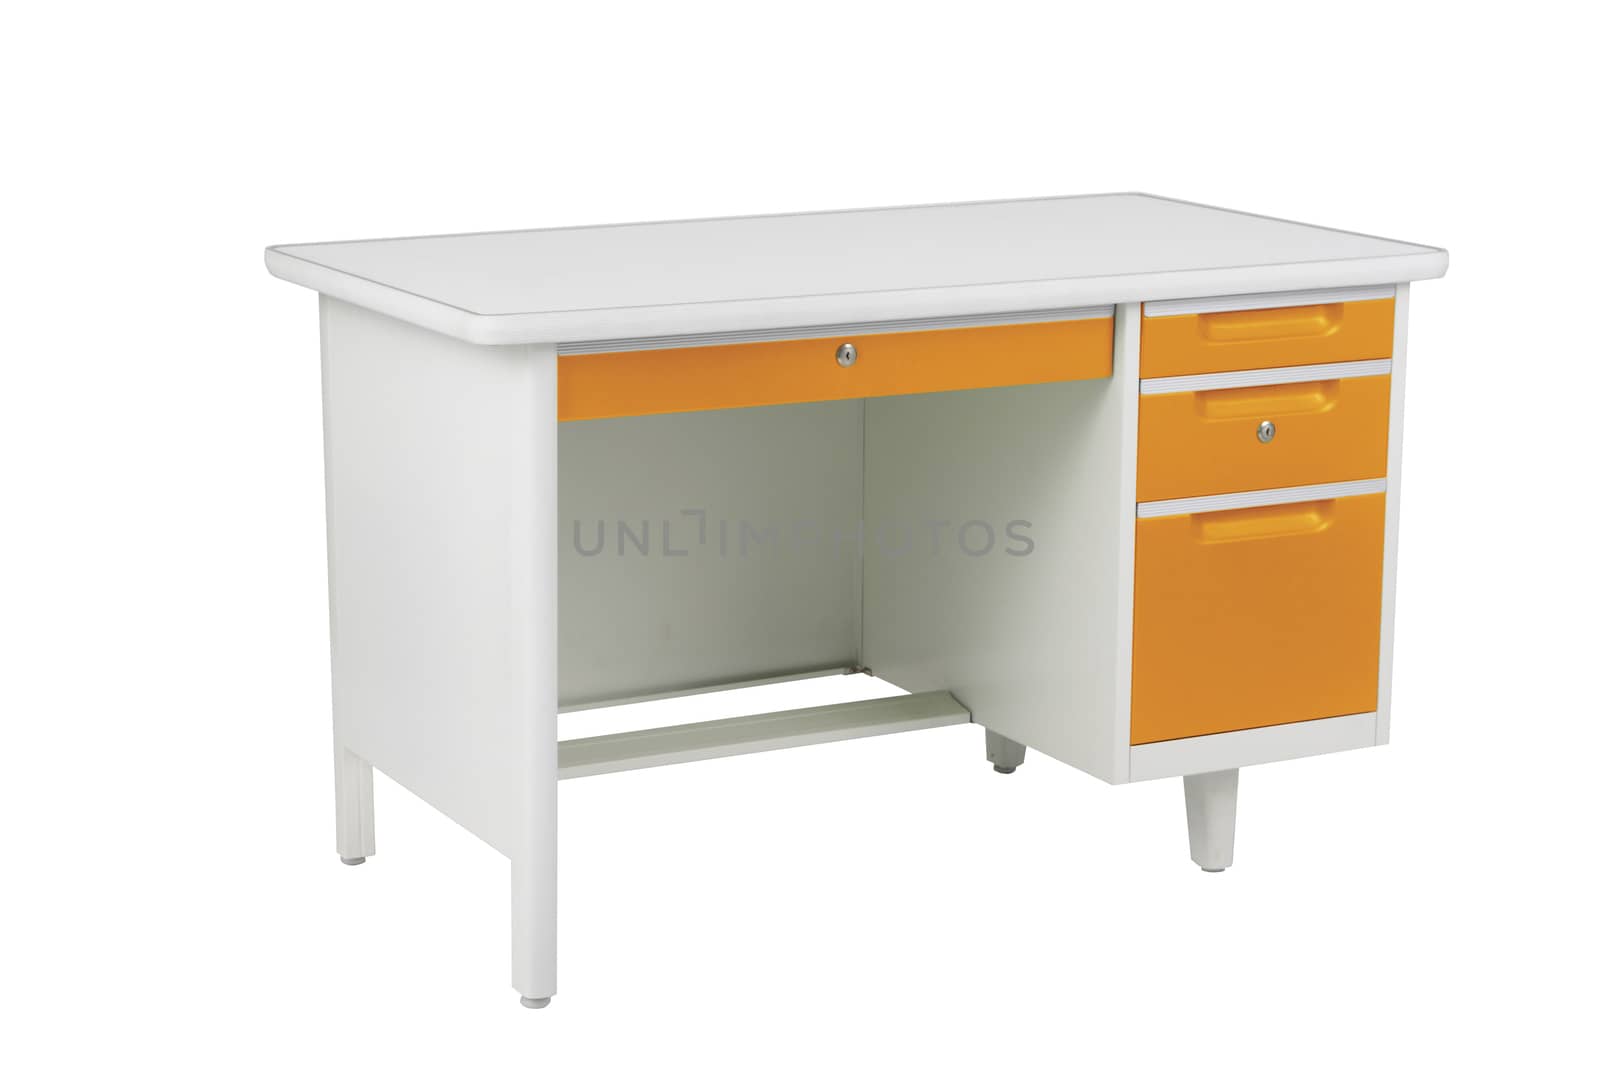 Orange and white steel office table with drawers furniture isolated on white background.